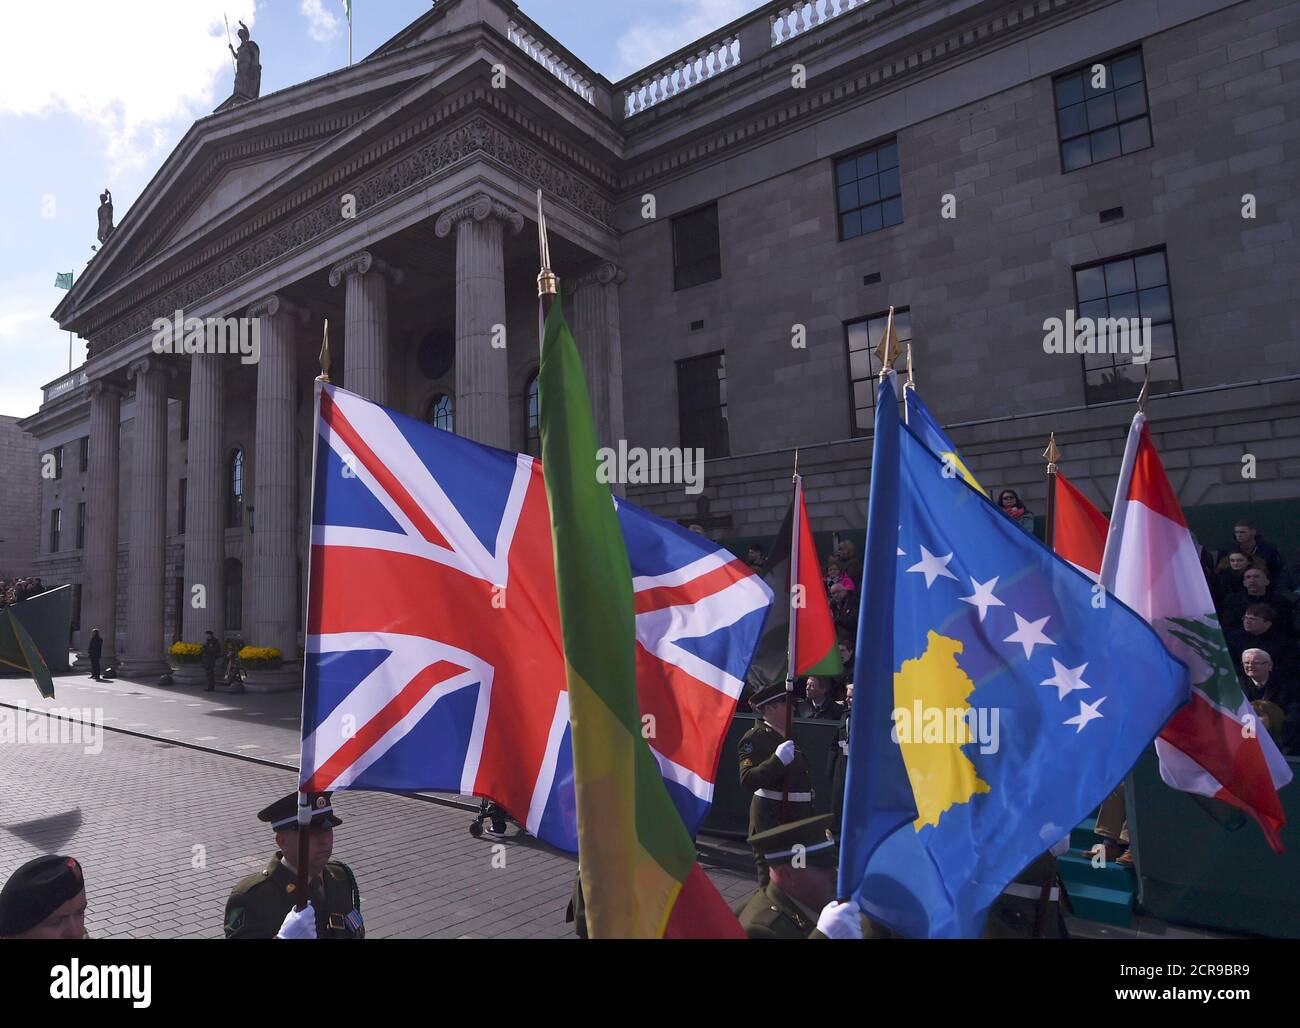 Britain and Ireland's flags fly outside the GPO building during the commemoration of the 100 year anniversary of the Irish Easter Rising in Dublin, Ireland, March 27, 2016. REUTERS/Clodagh Kilcoyne Stock Photo